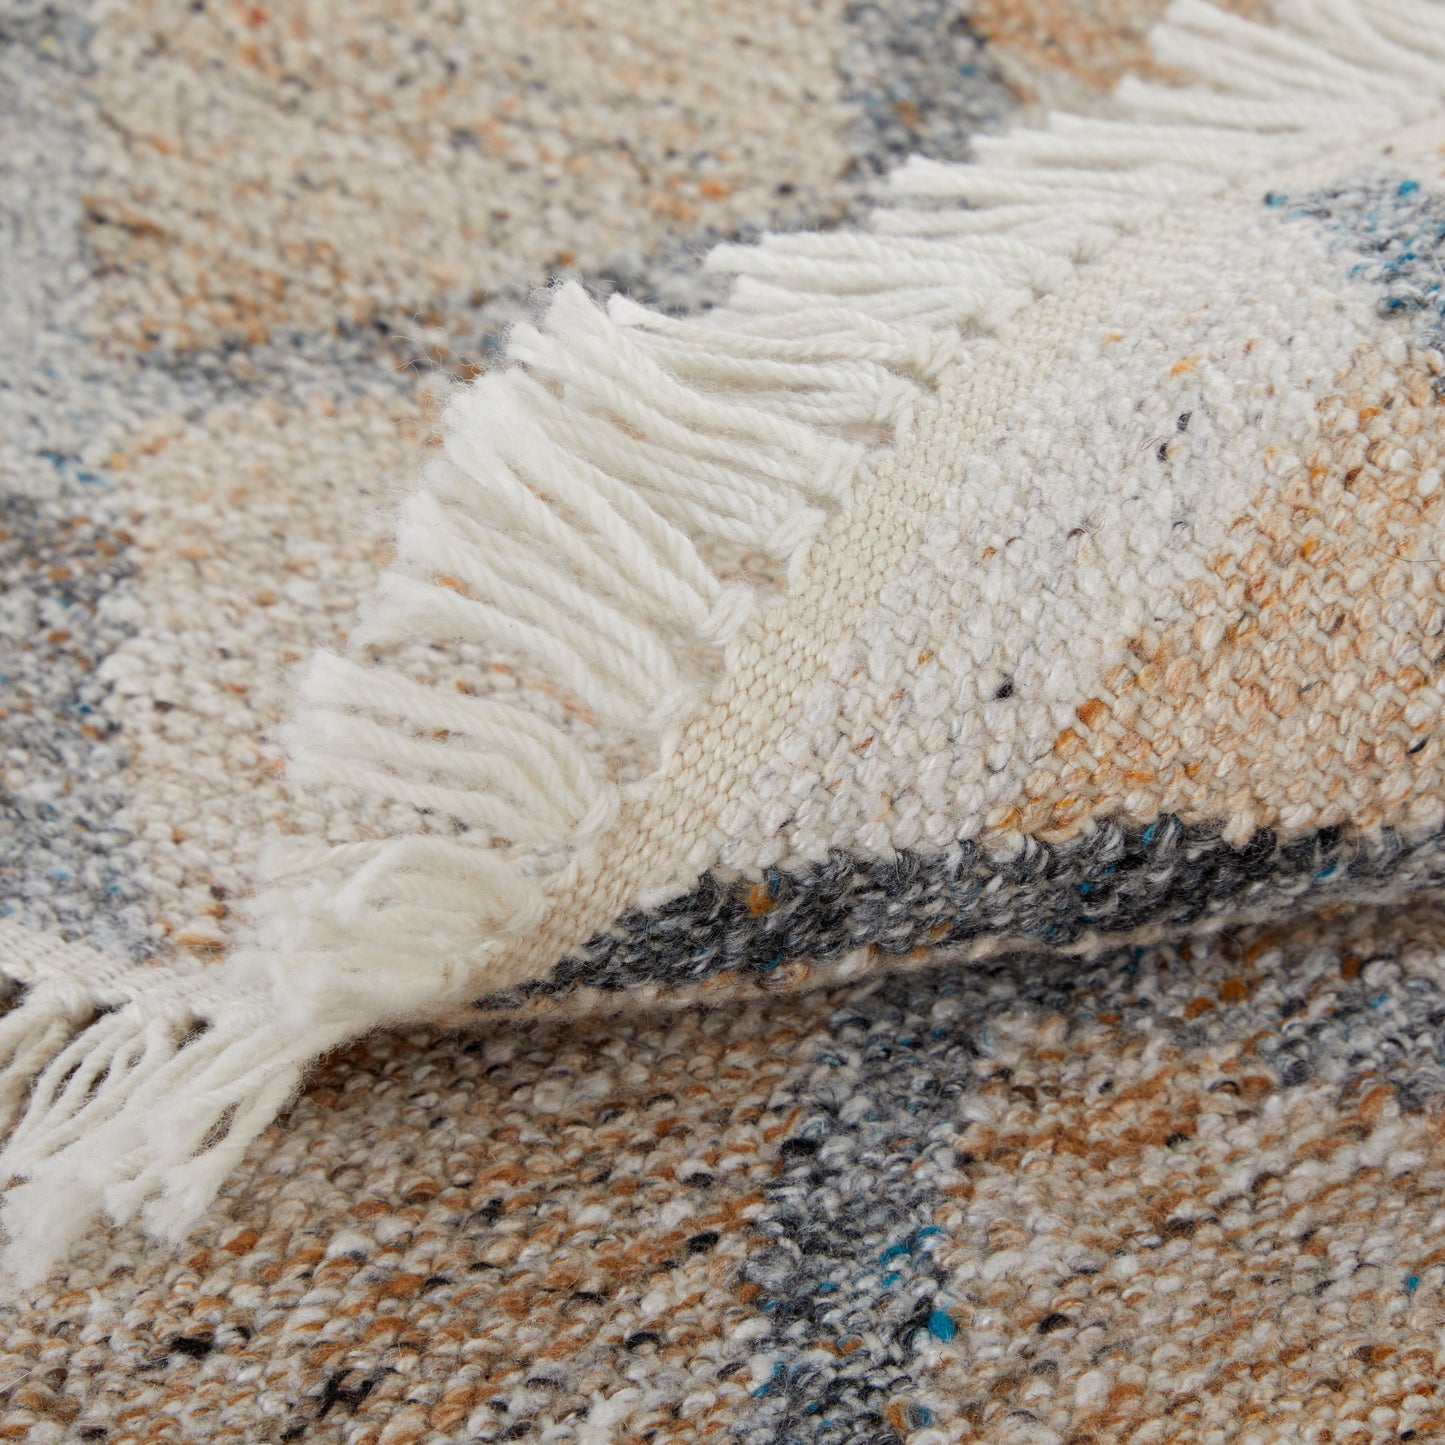 Beckett 0771F Hand Woven Synthetic Blend Indoor Area Rug by Feizy Rugs